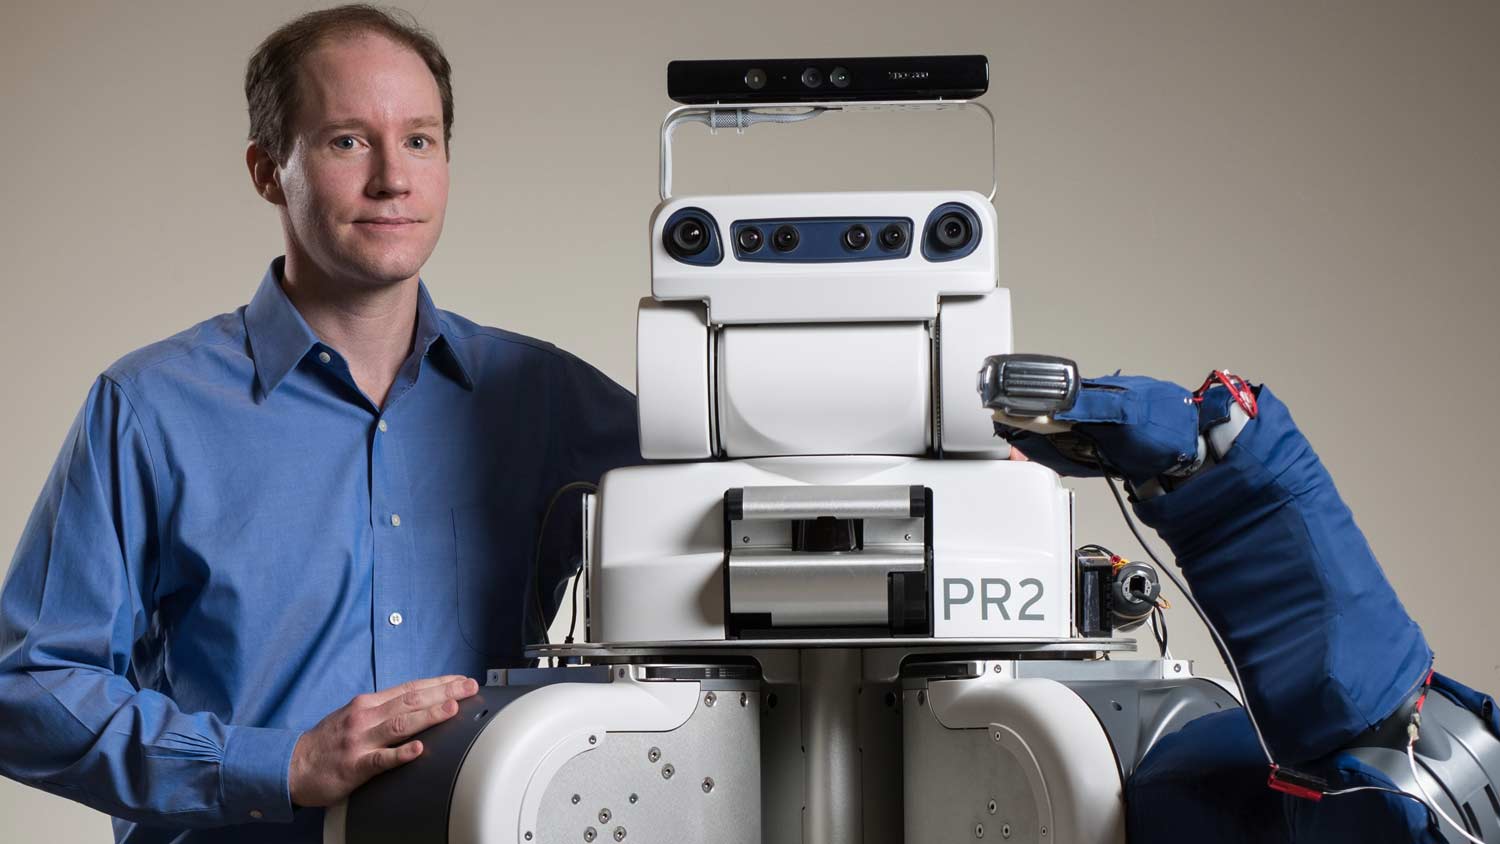 charlie kemp poses with assistive robot, pr2